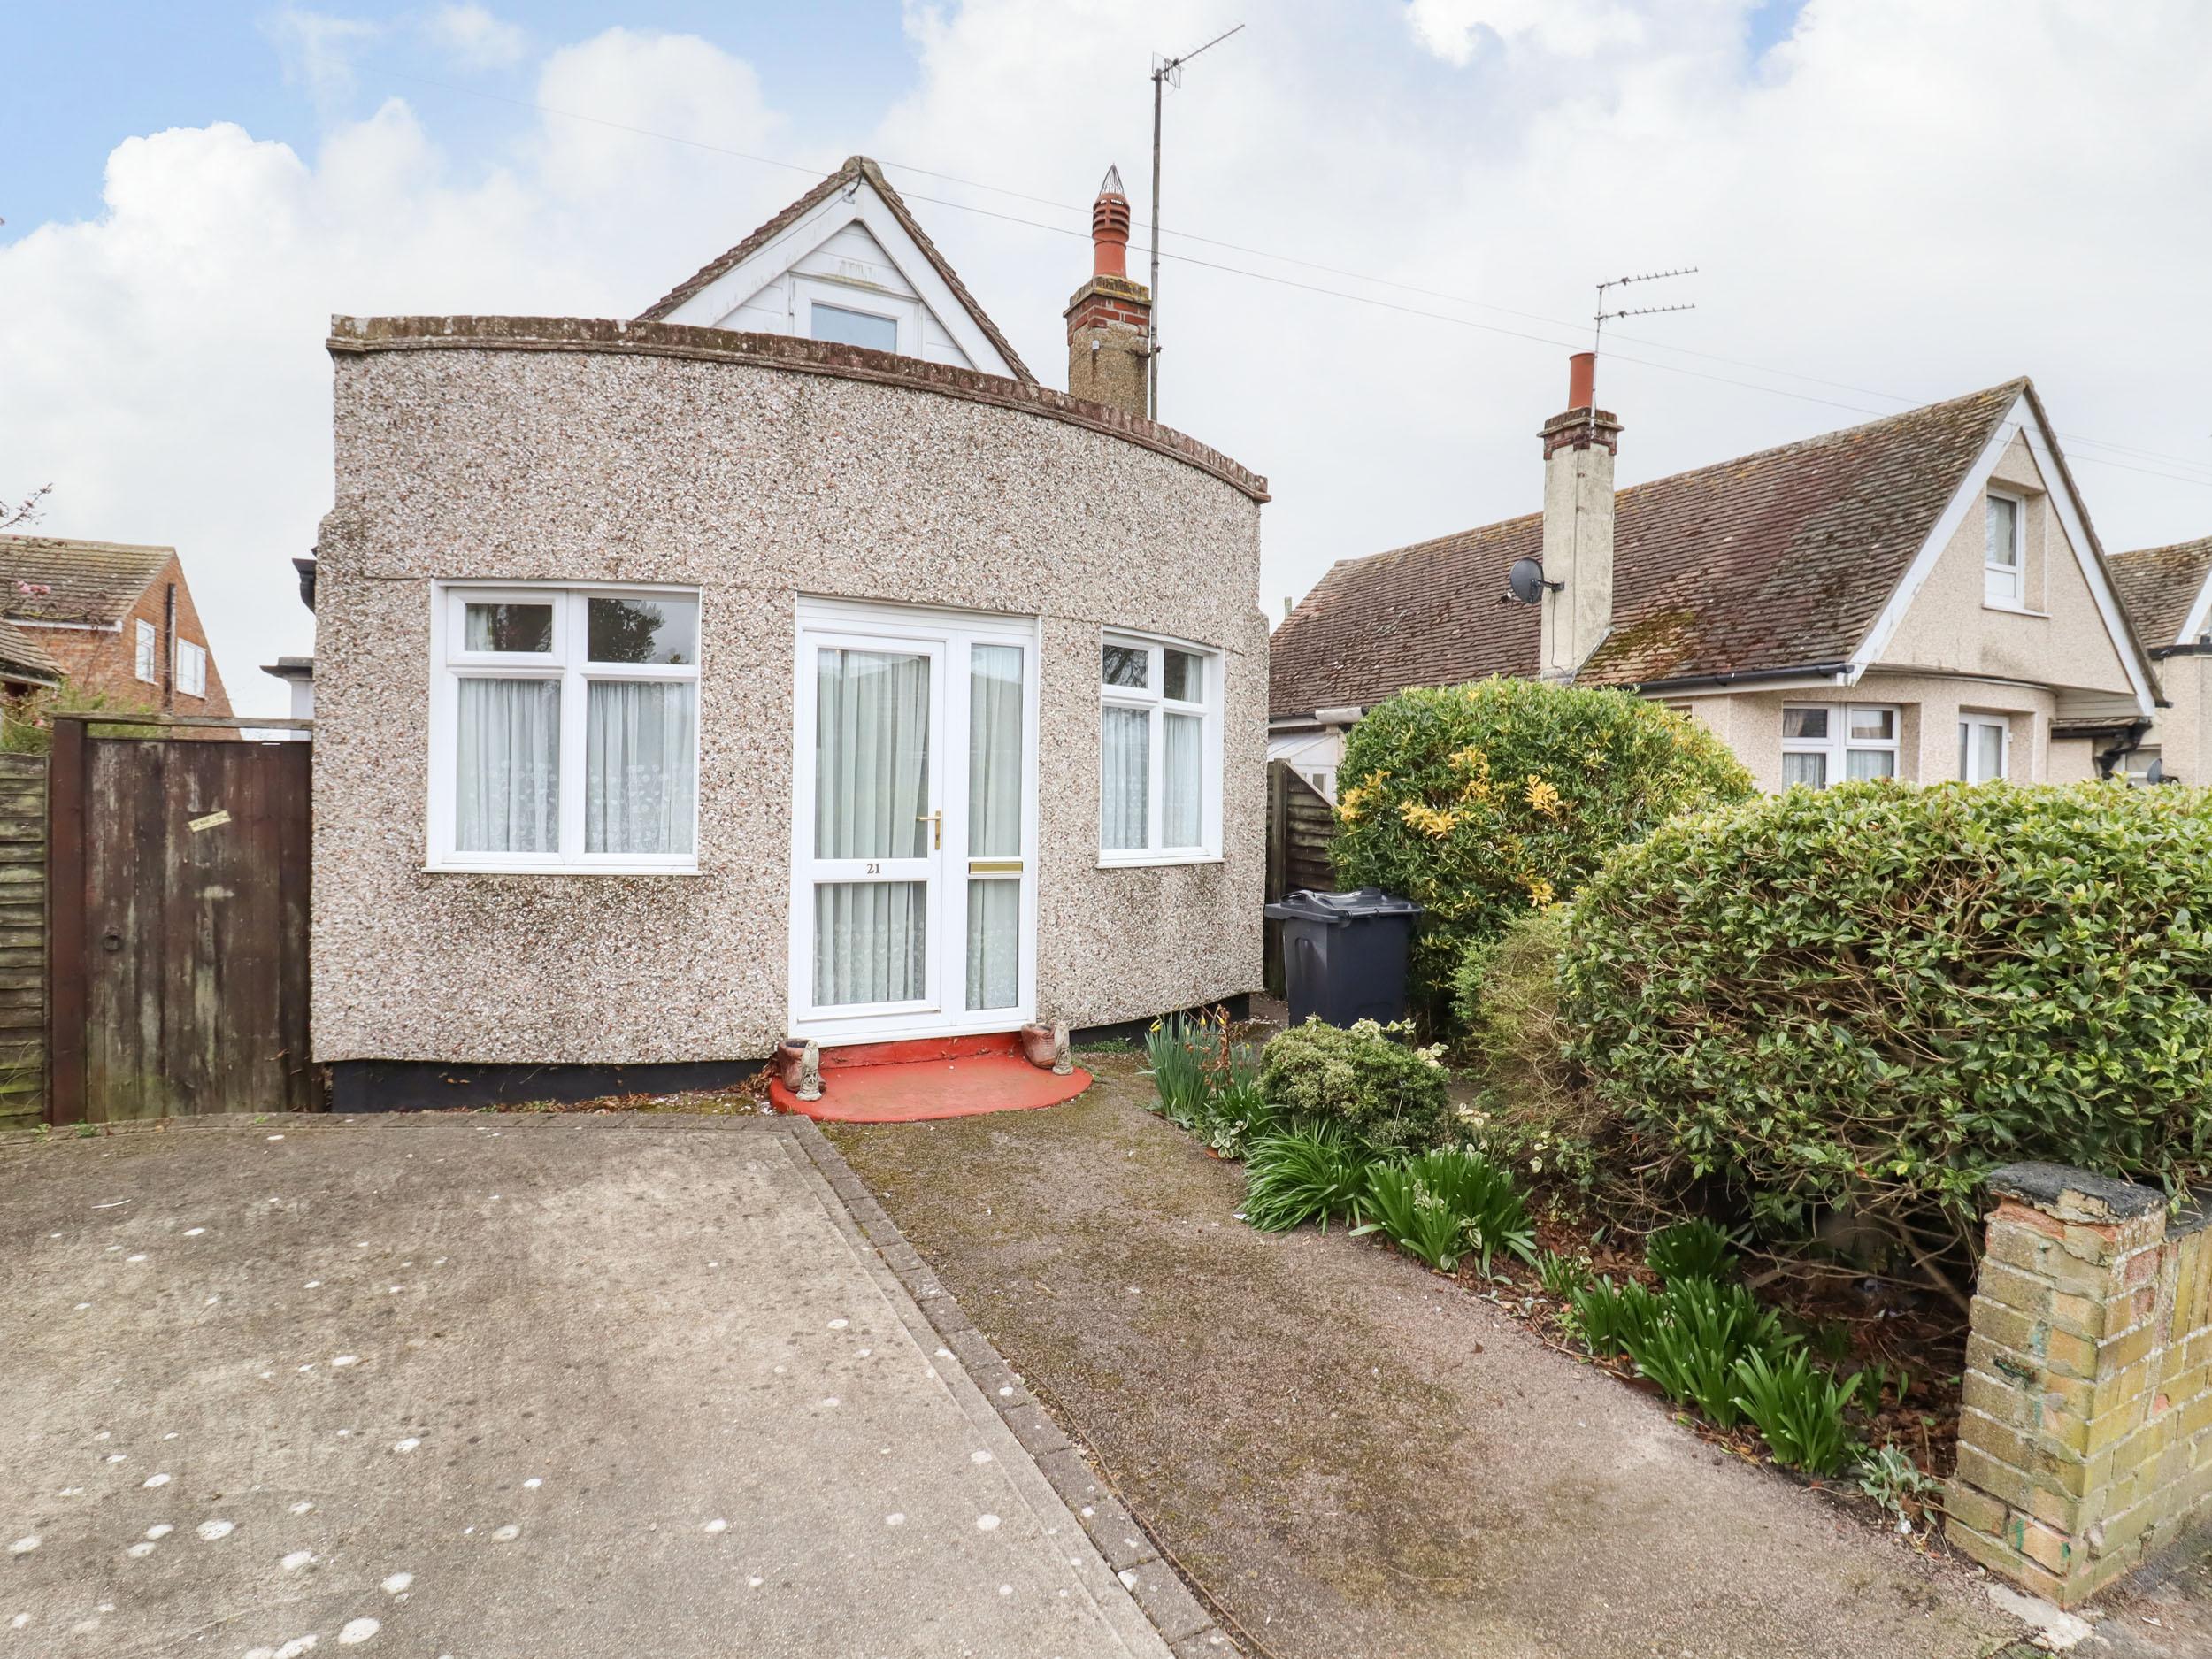 Holiday Cottage Reviews for 21 Crossways - Holiday Cottage in Clacton On Sea, Essex